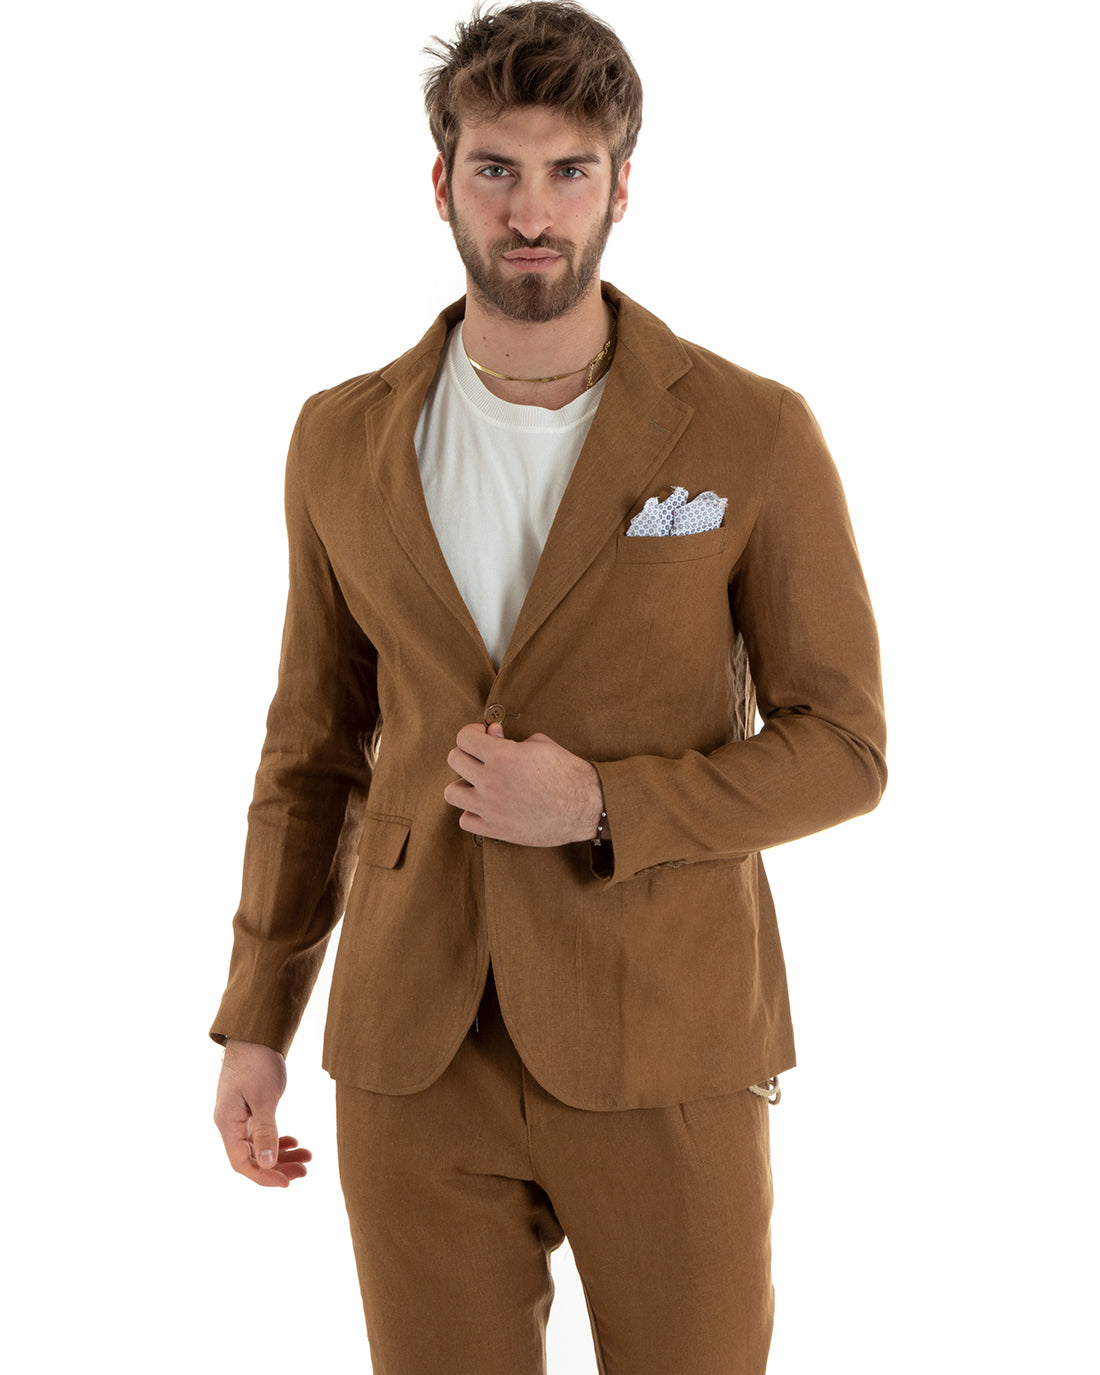 Single-breasted men's suit, tailored linen suit, jacket and trousers in solid color Camel GIOSAL-OU2327A